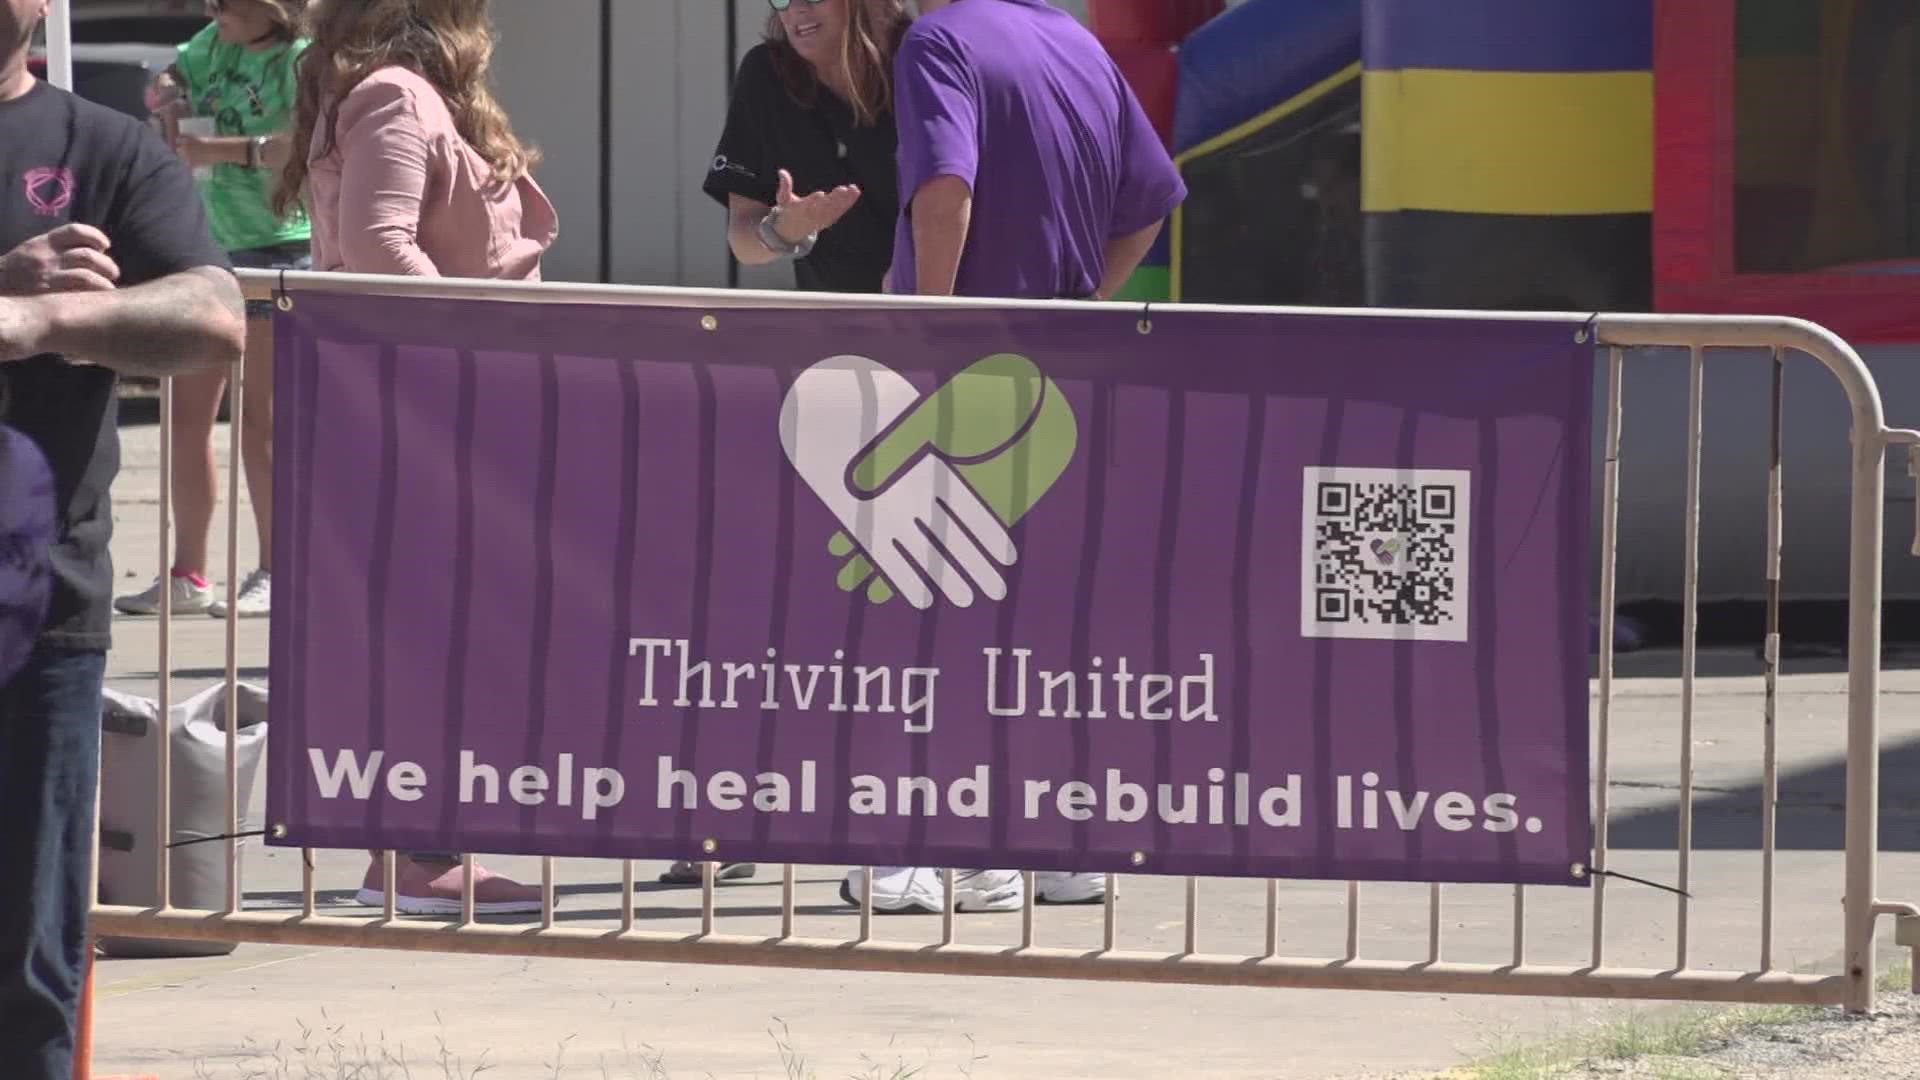 Thriving United hosts Big Texas Rally for Recovery at the Yucca Theater